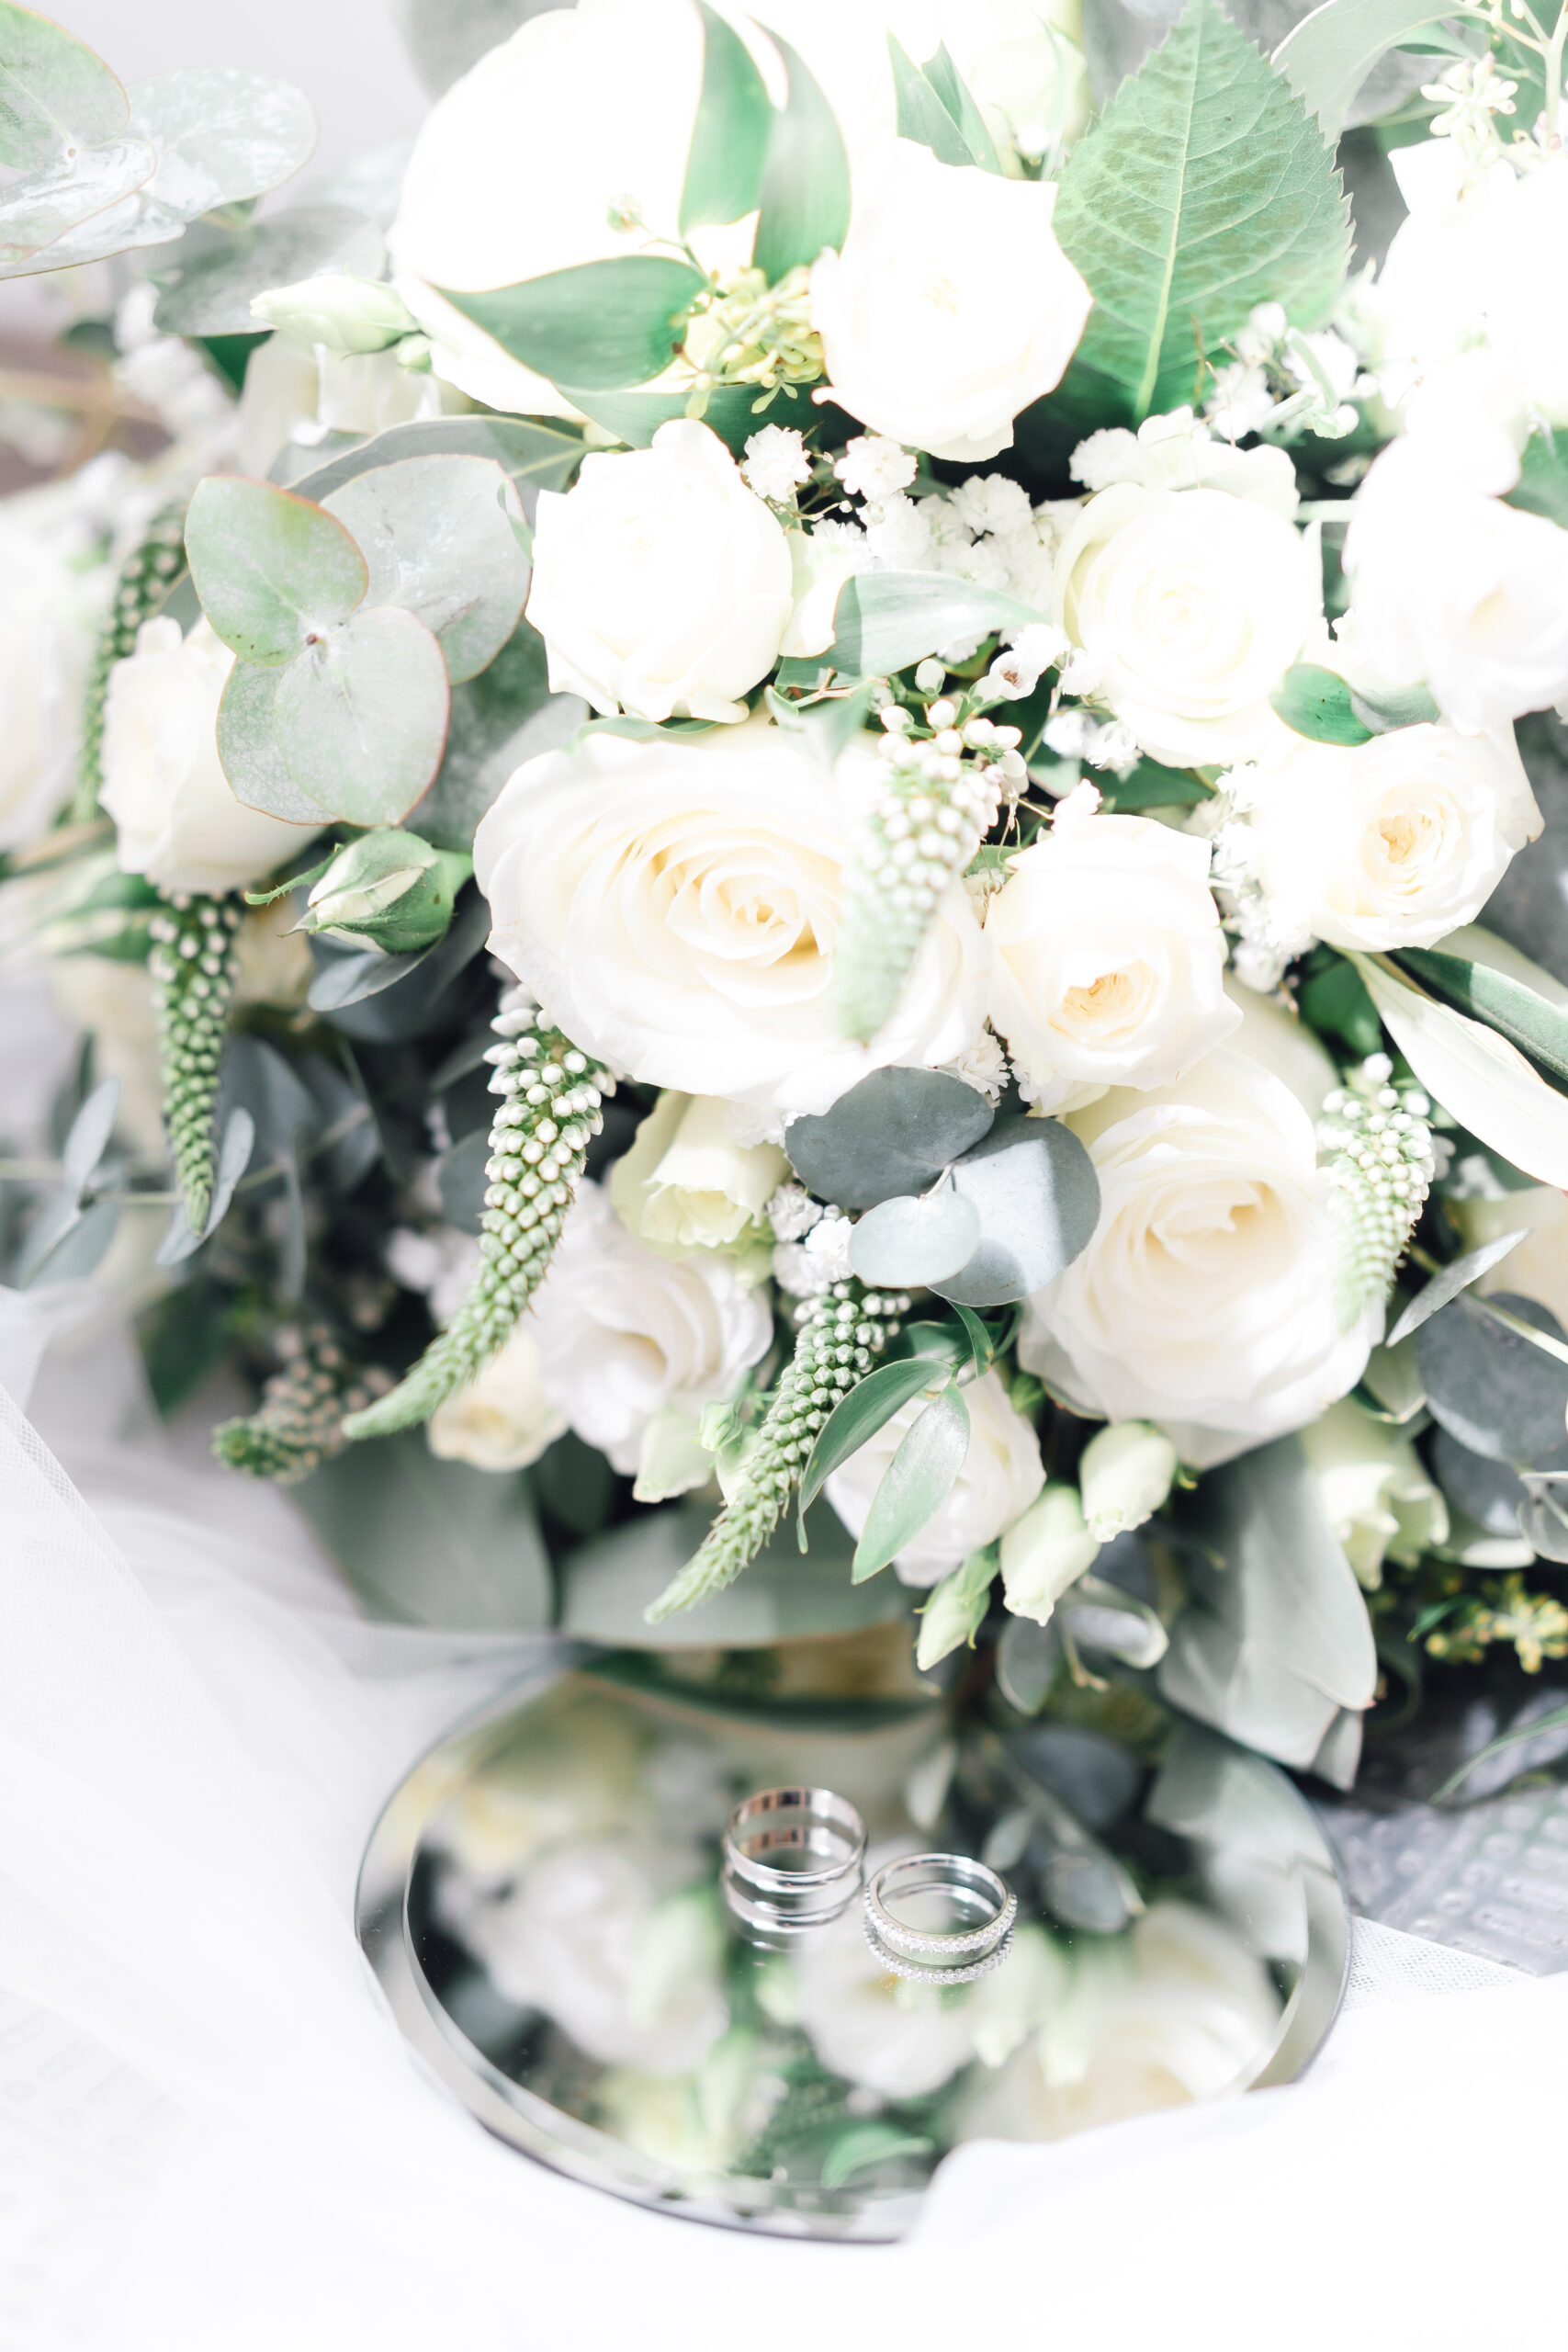 wedding rings and flowers Tips for Light & bright bridal prep Wedding photographs